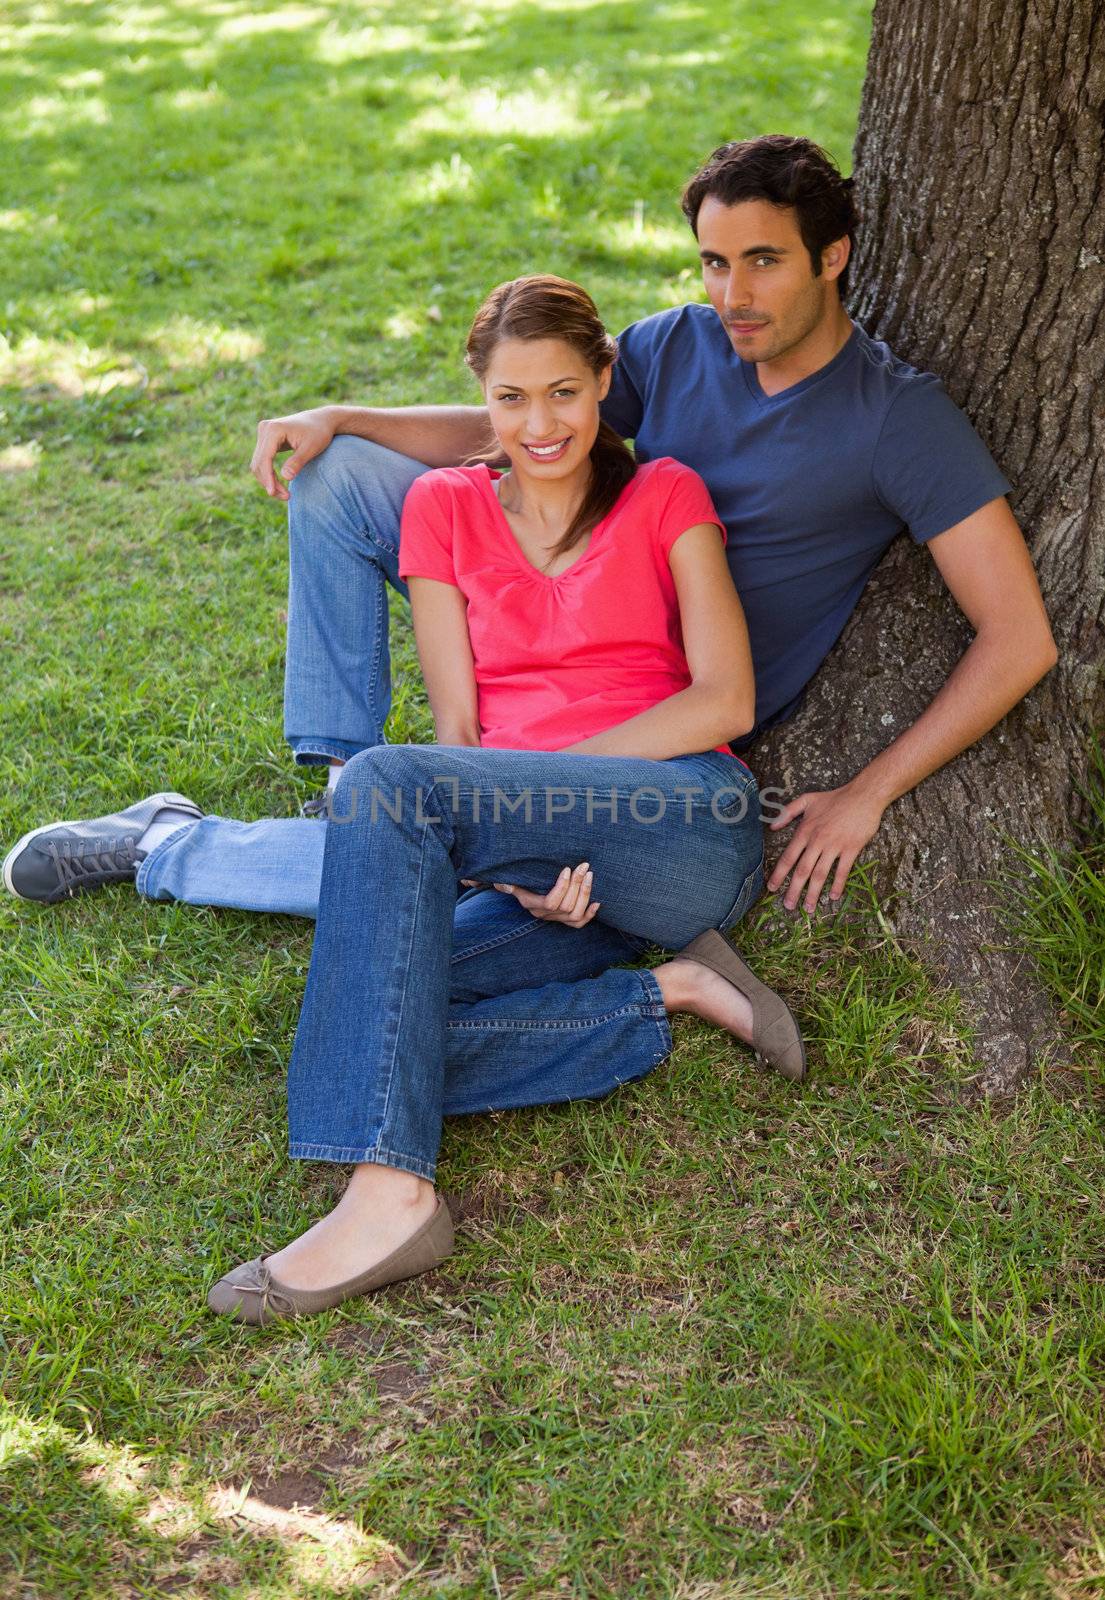 Two smiling friends looking towards the side while sitting together against the trunk of a tree